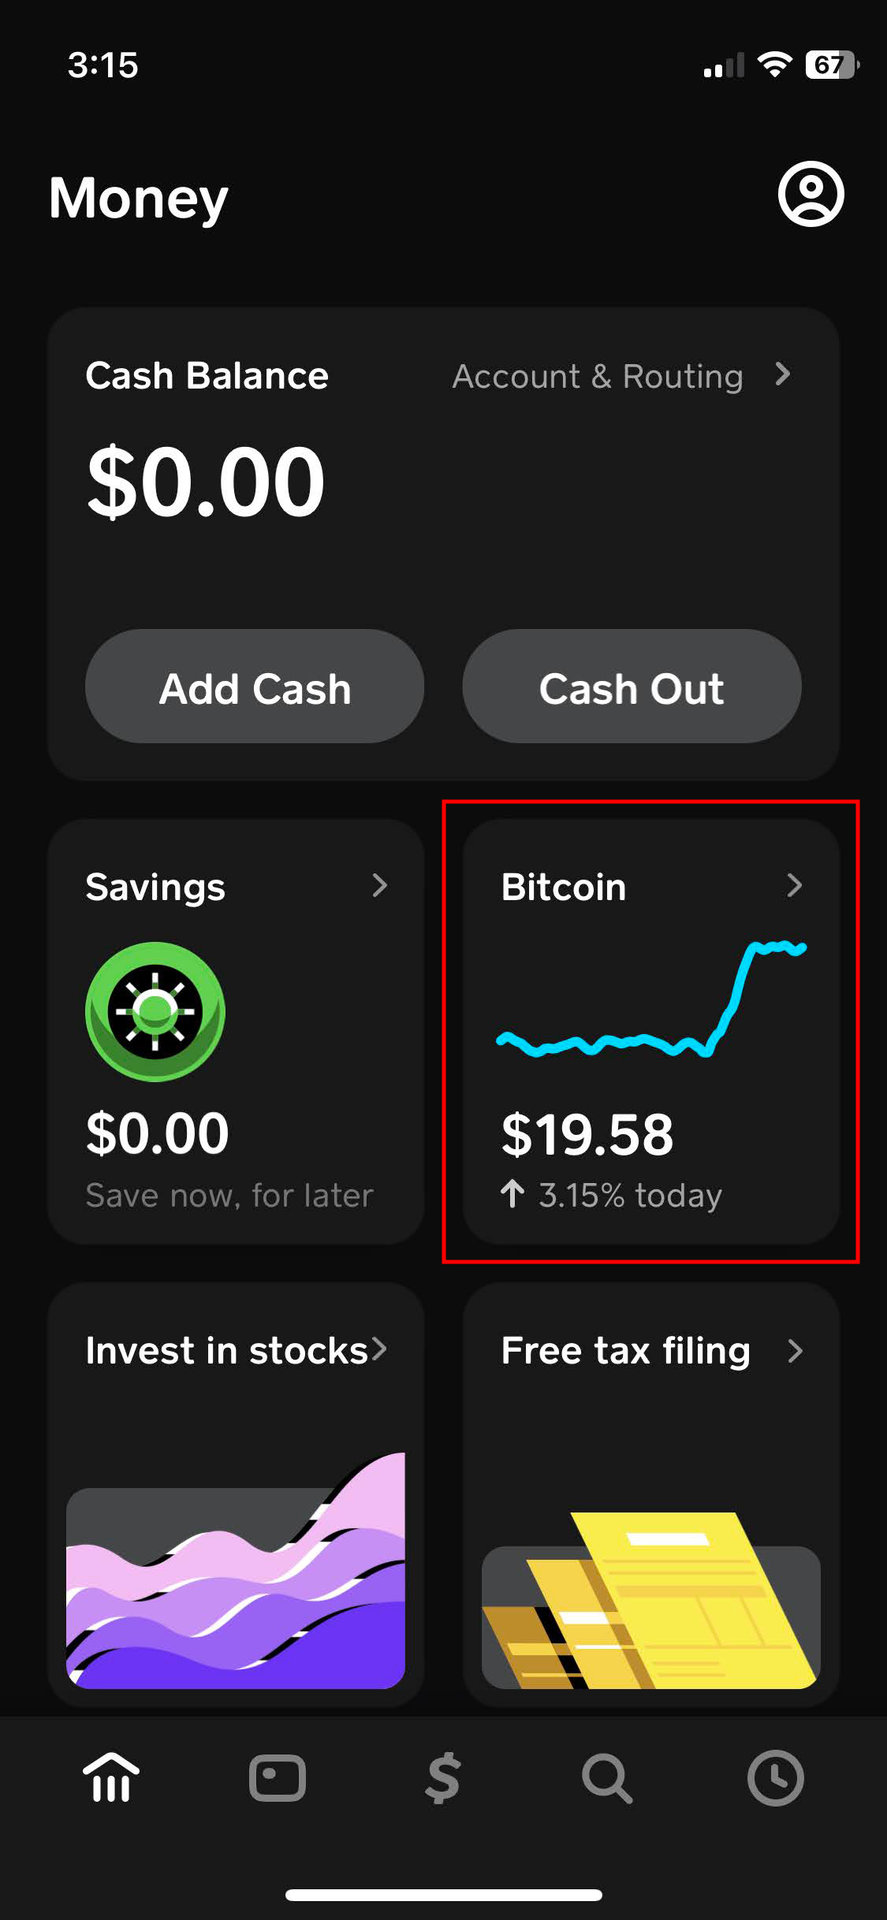 If you're thinking about selling your Bitcoin, Cash App is one of the most popular platforms to do it. Cash App, developed by Square Inc., is a user-friendly mobile payment app that allows you to send, receive, and store money. In addition, it also enables you to buy and sell Bitcoin.